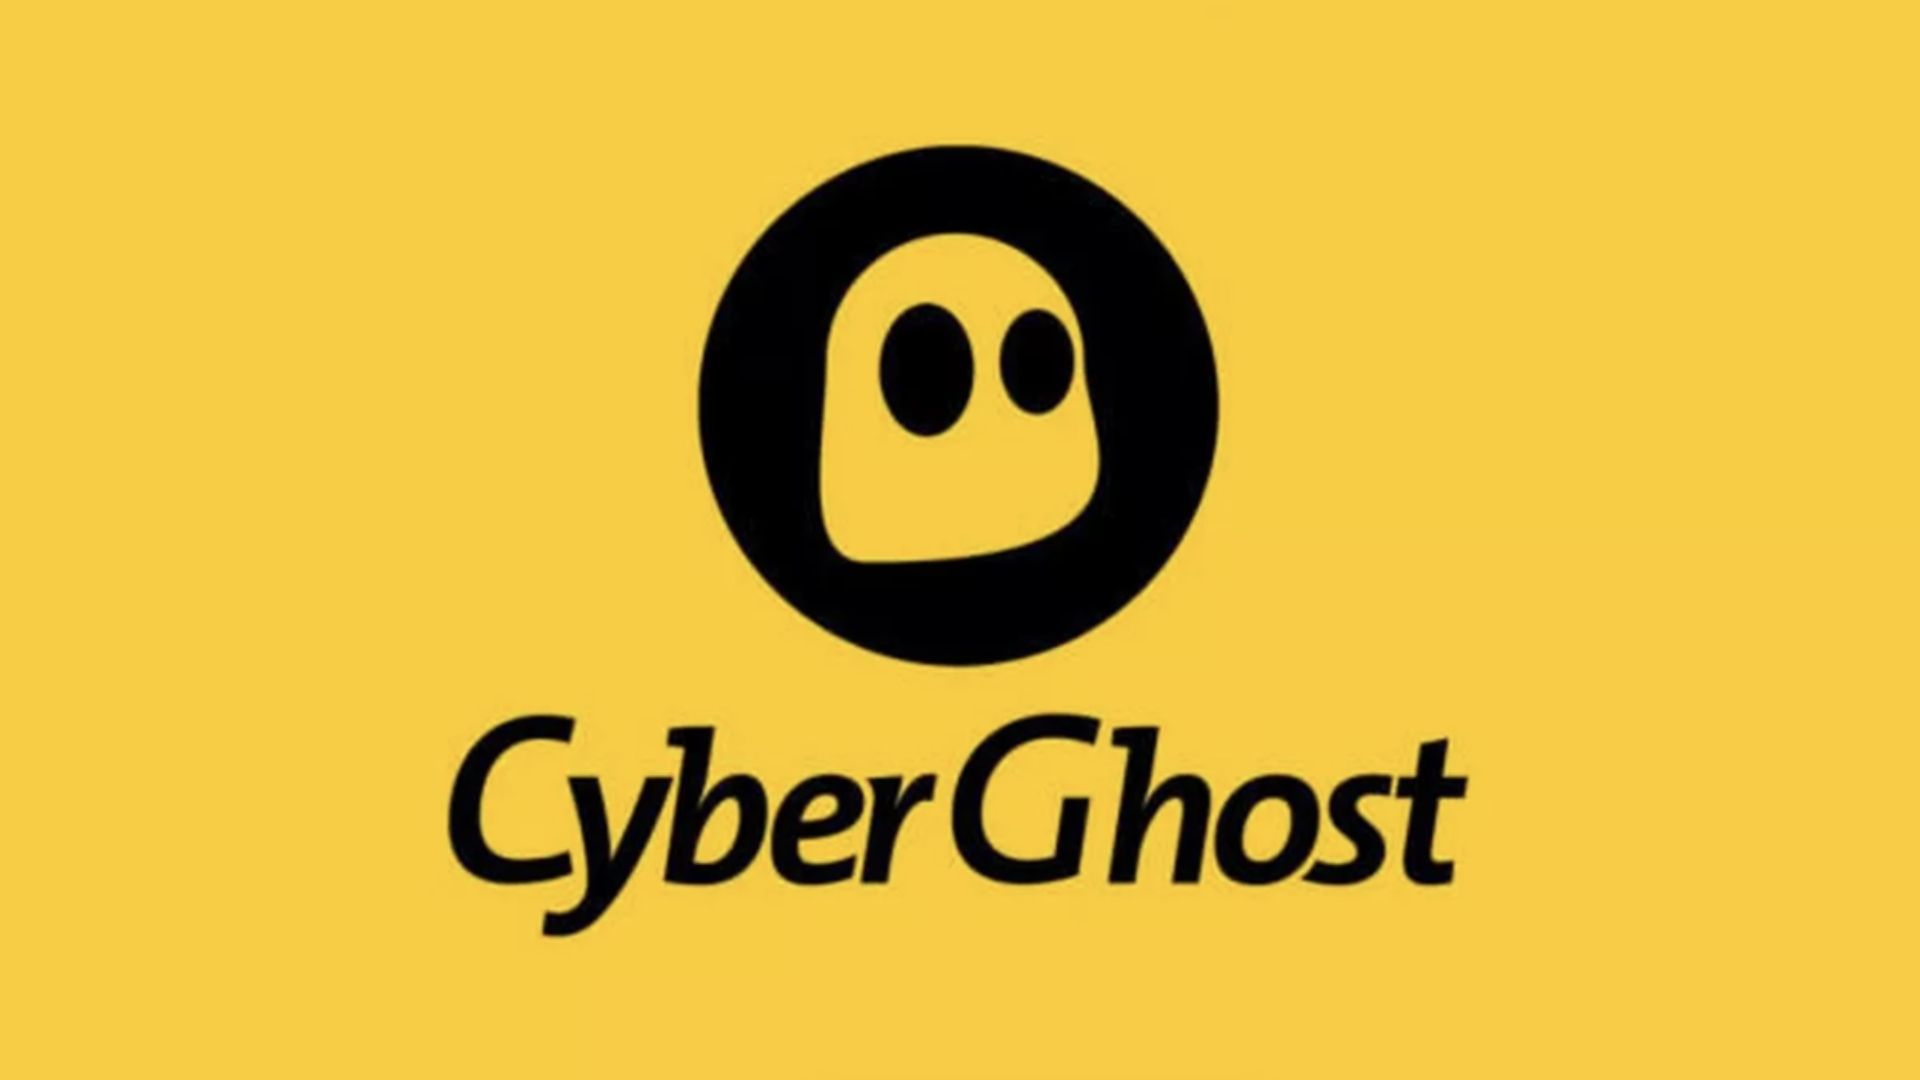 VPN servers for CyberGhost.  The image shows the company logo.